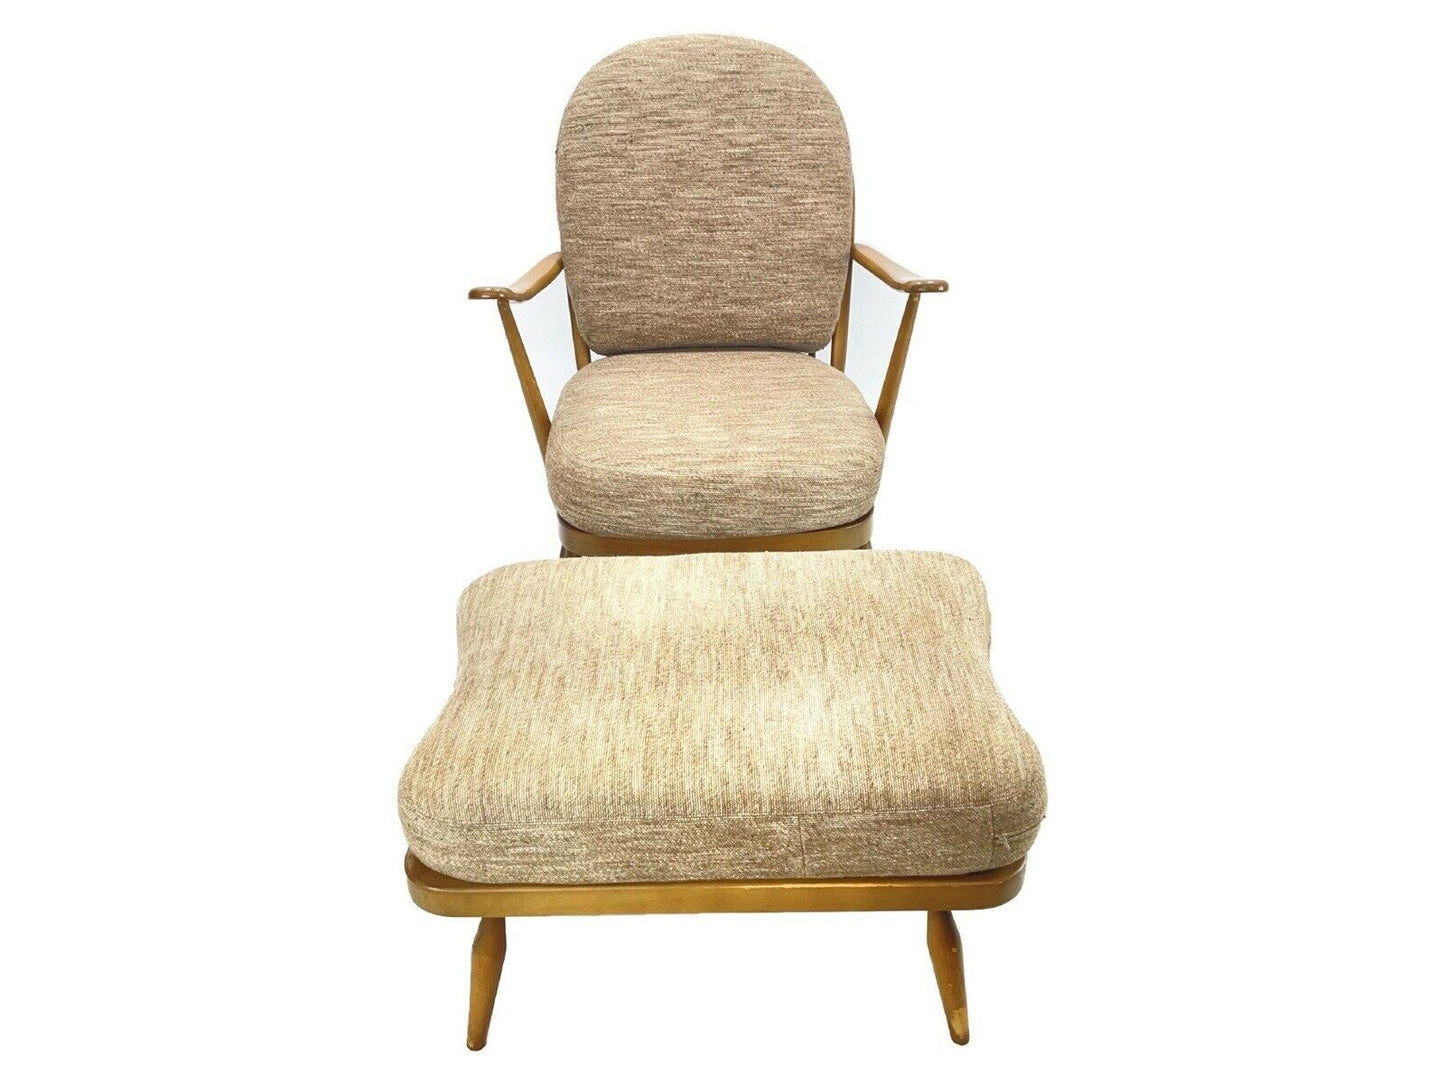 Ercol Armchair No. 203 and Matching Foot Stool No. 341 WITH Beige Cushions